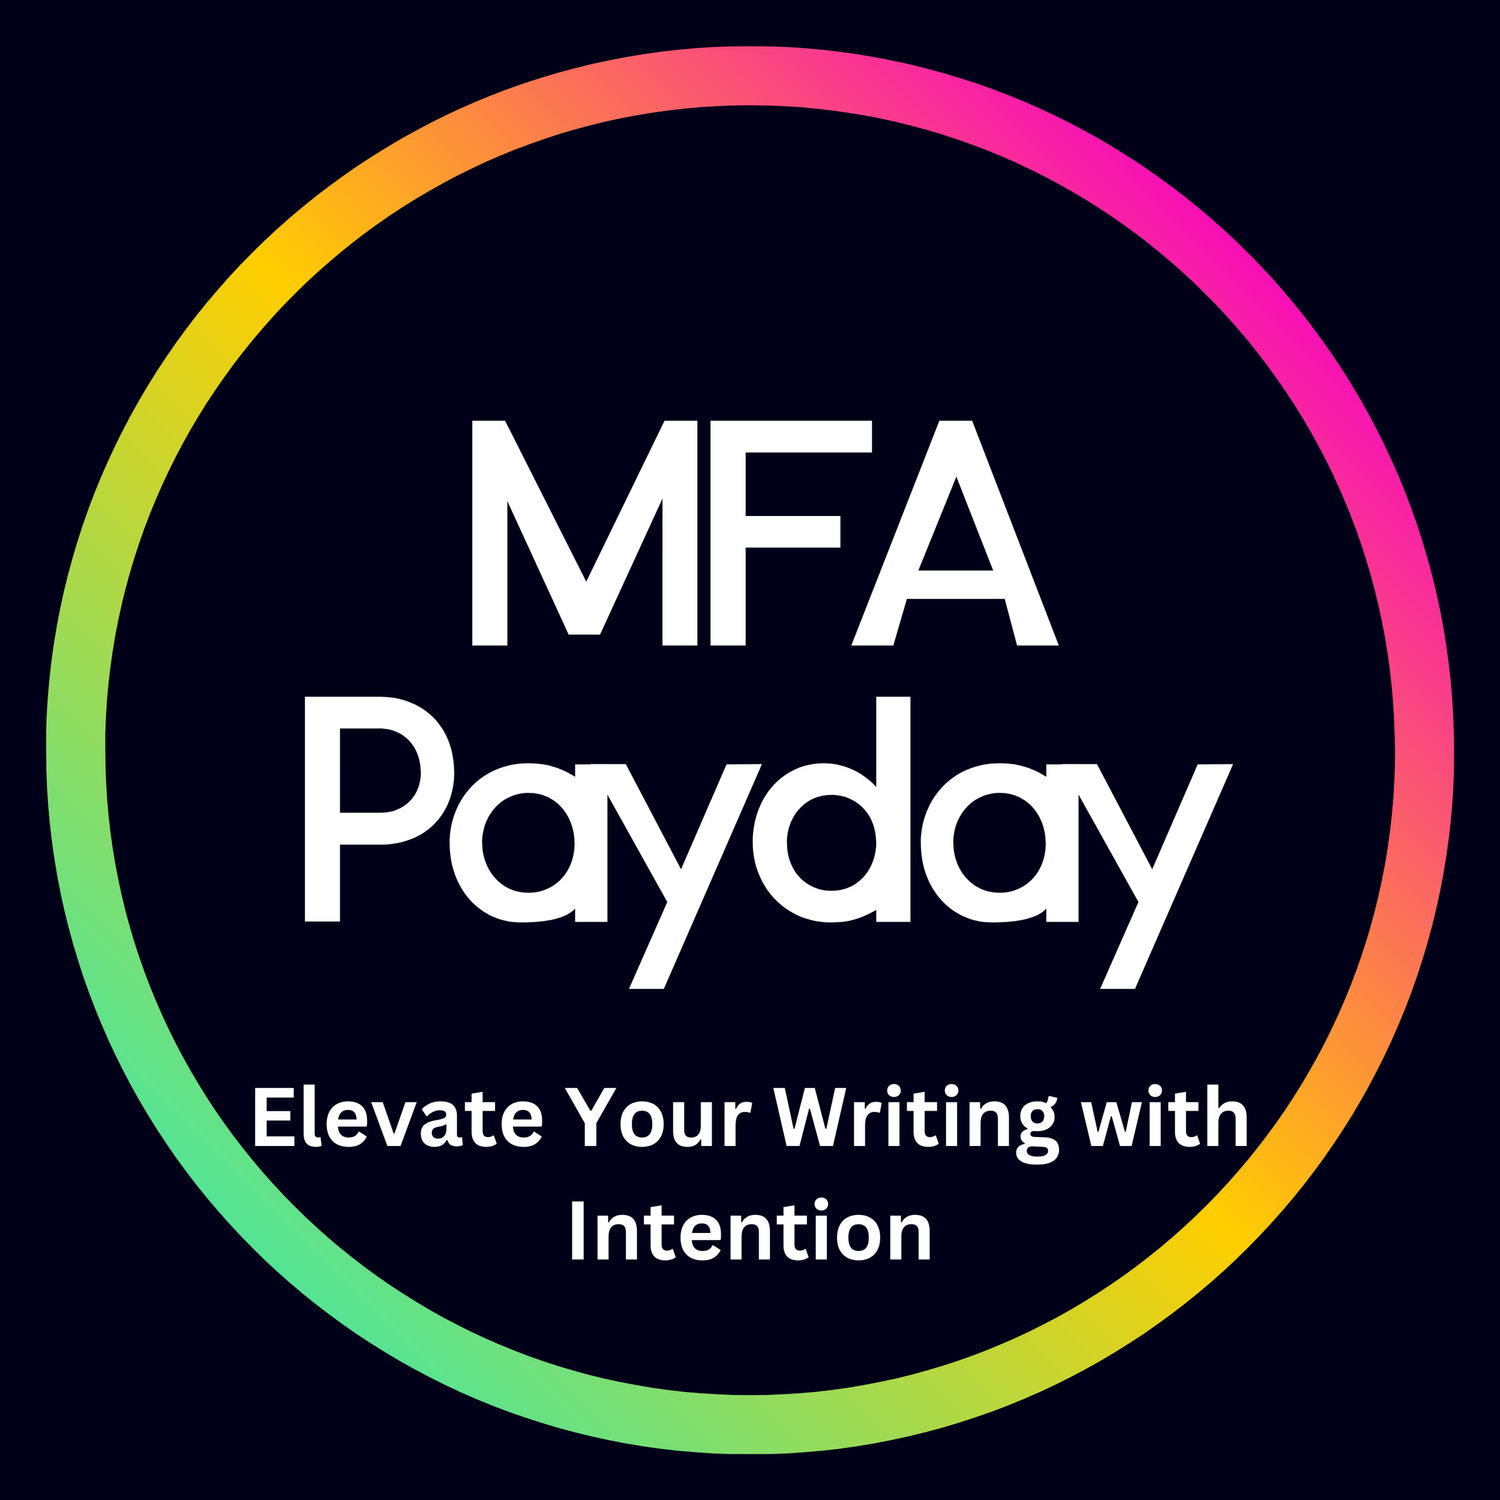 MFA PAYDAY: CREATE YOUR WRITING WITH INTENTION!  